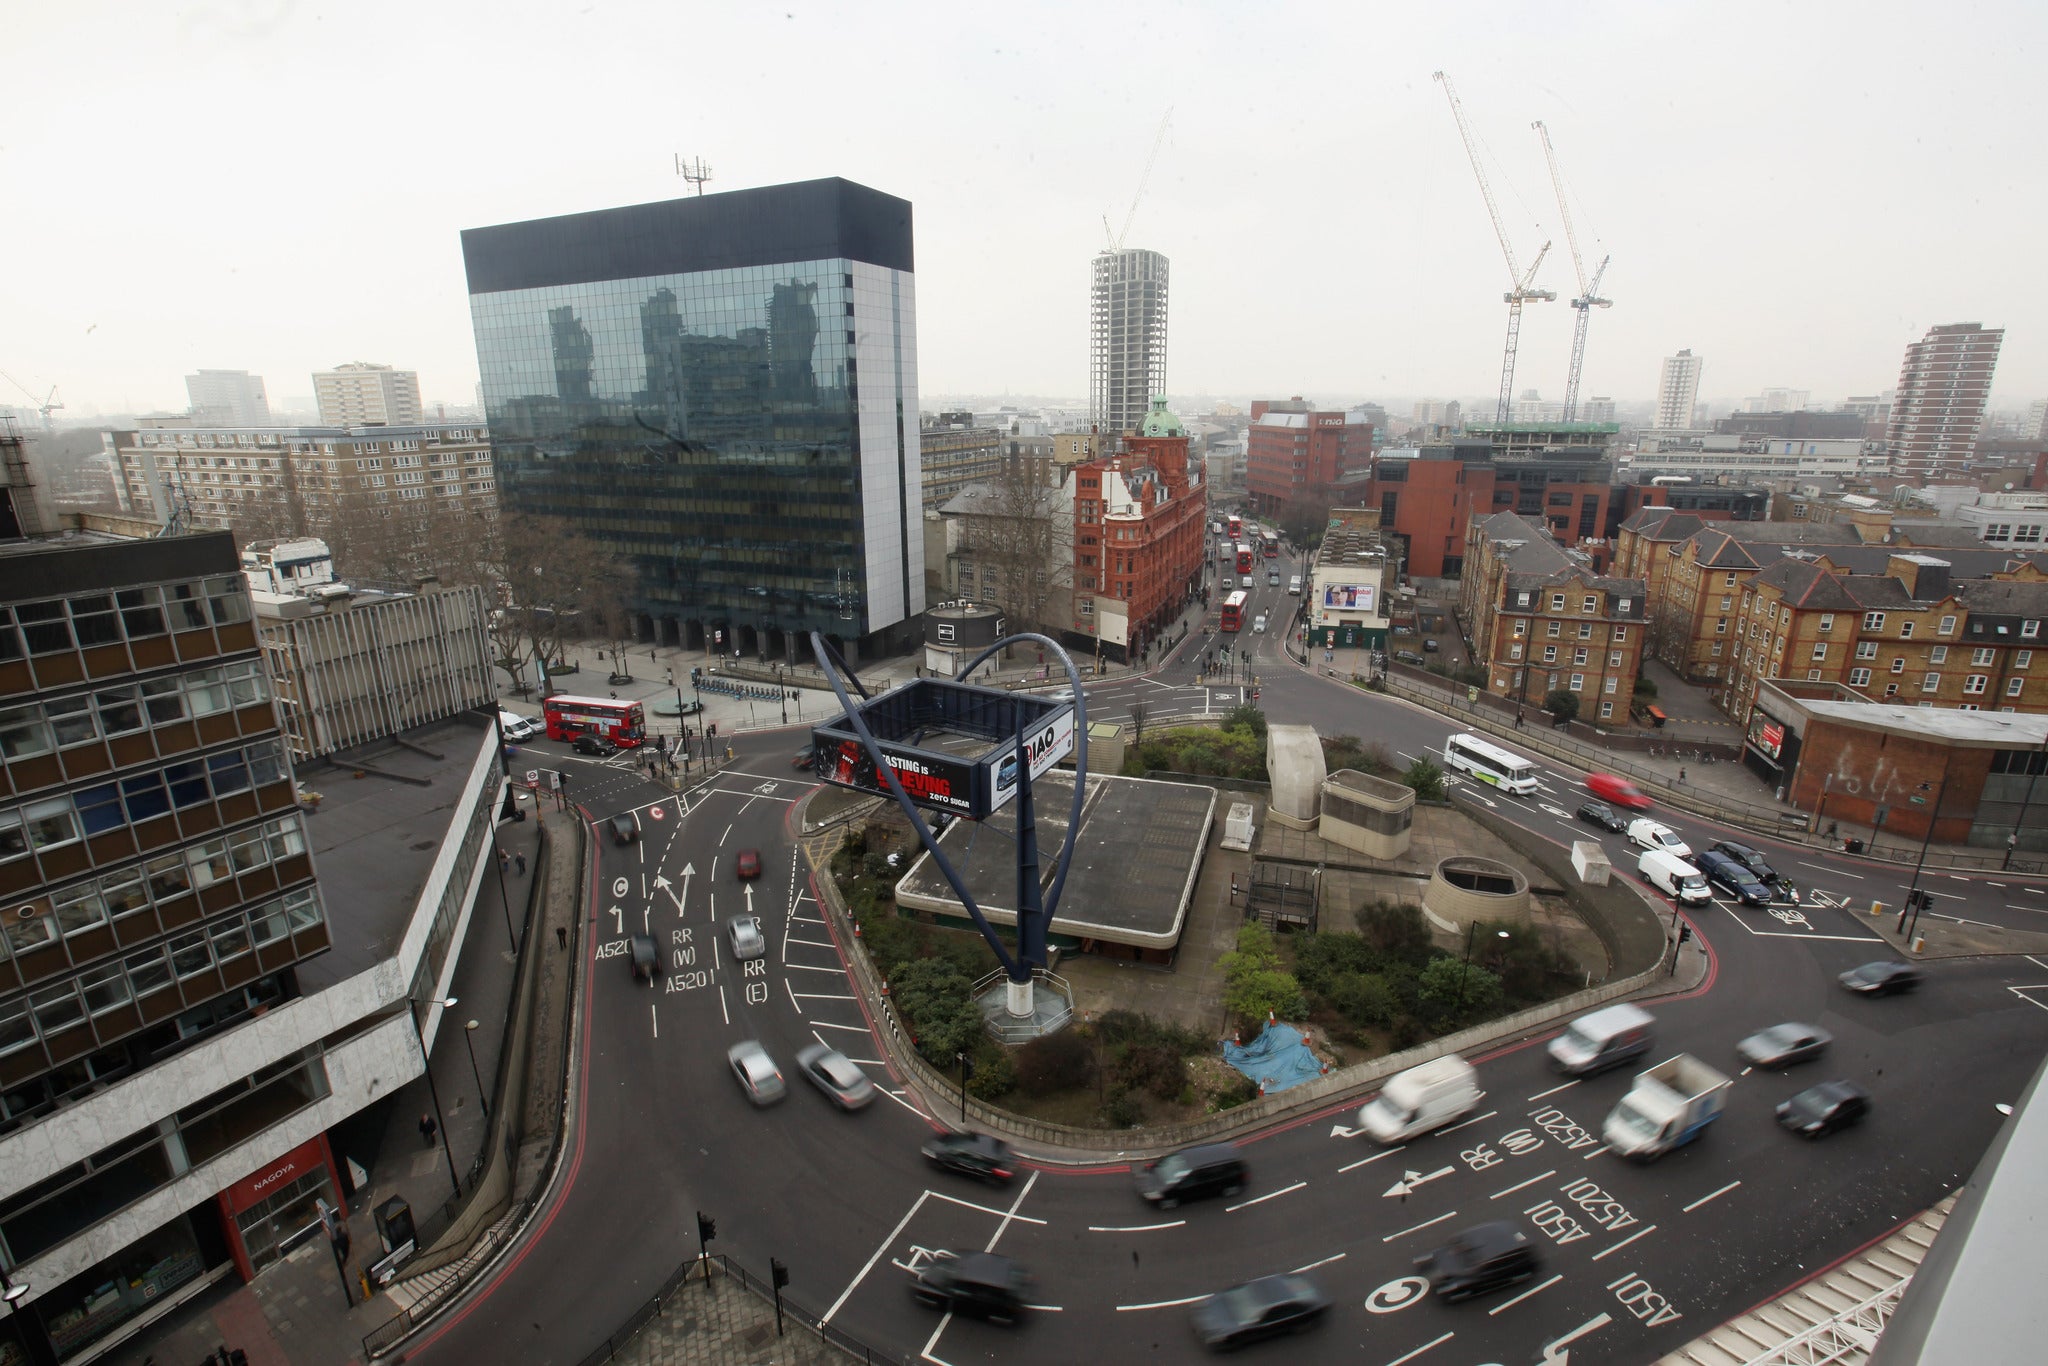 The Old Street roundabout in Shoreditch, also known as 'Silicon Roundabout', forms the hub for London's digital sector.